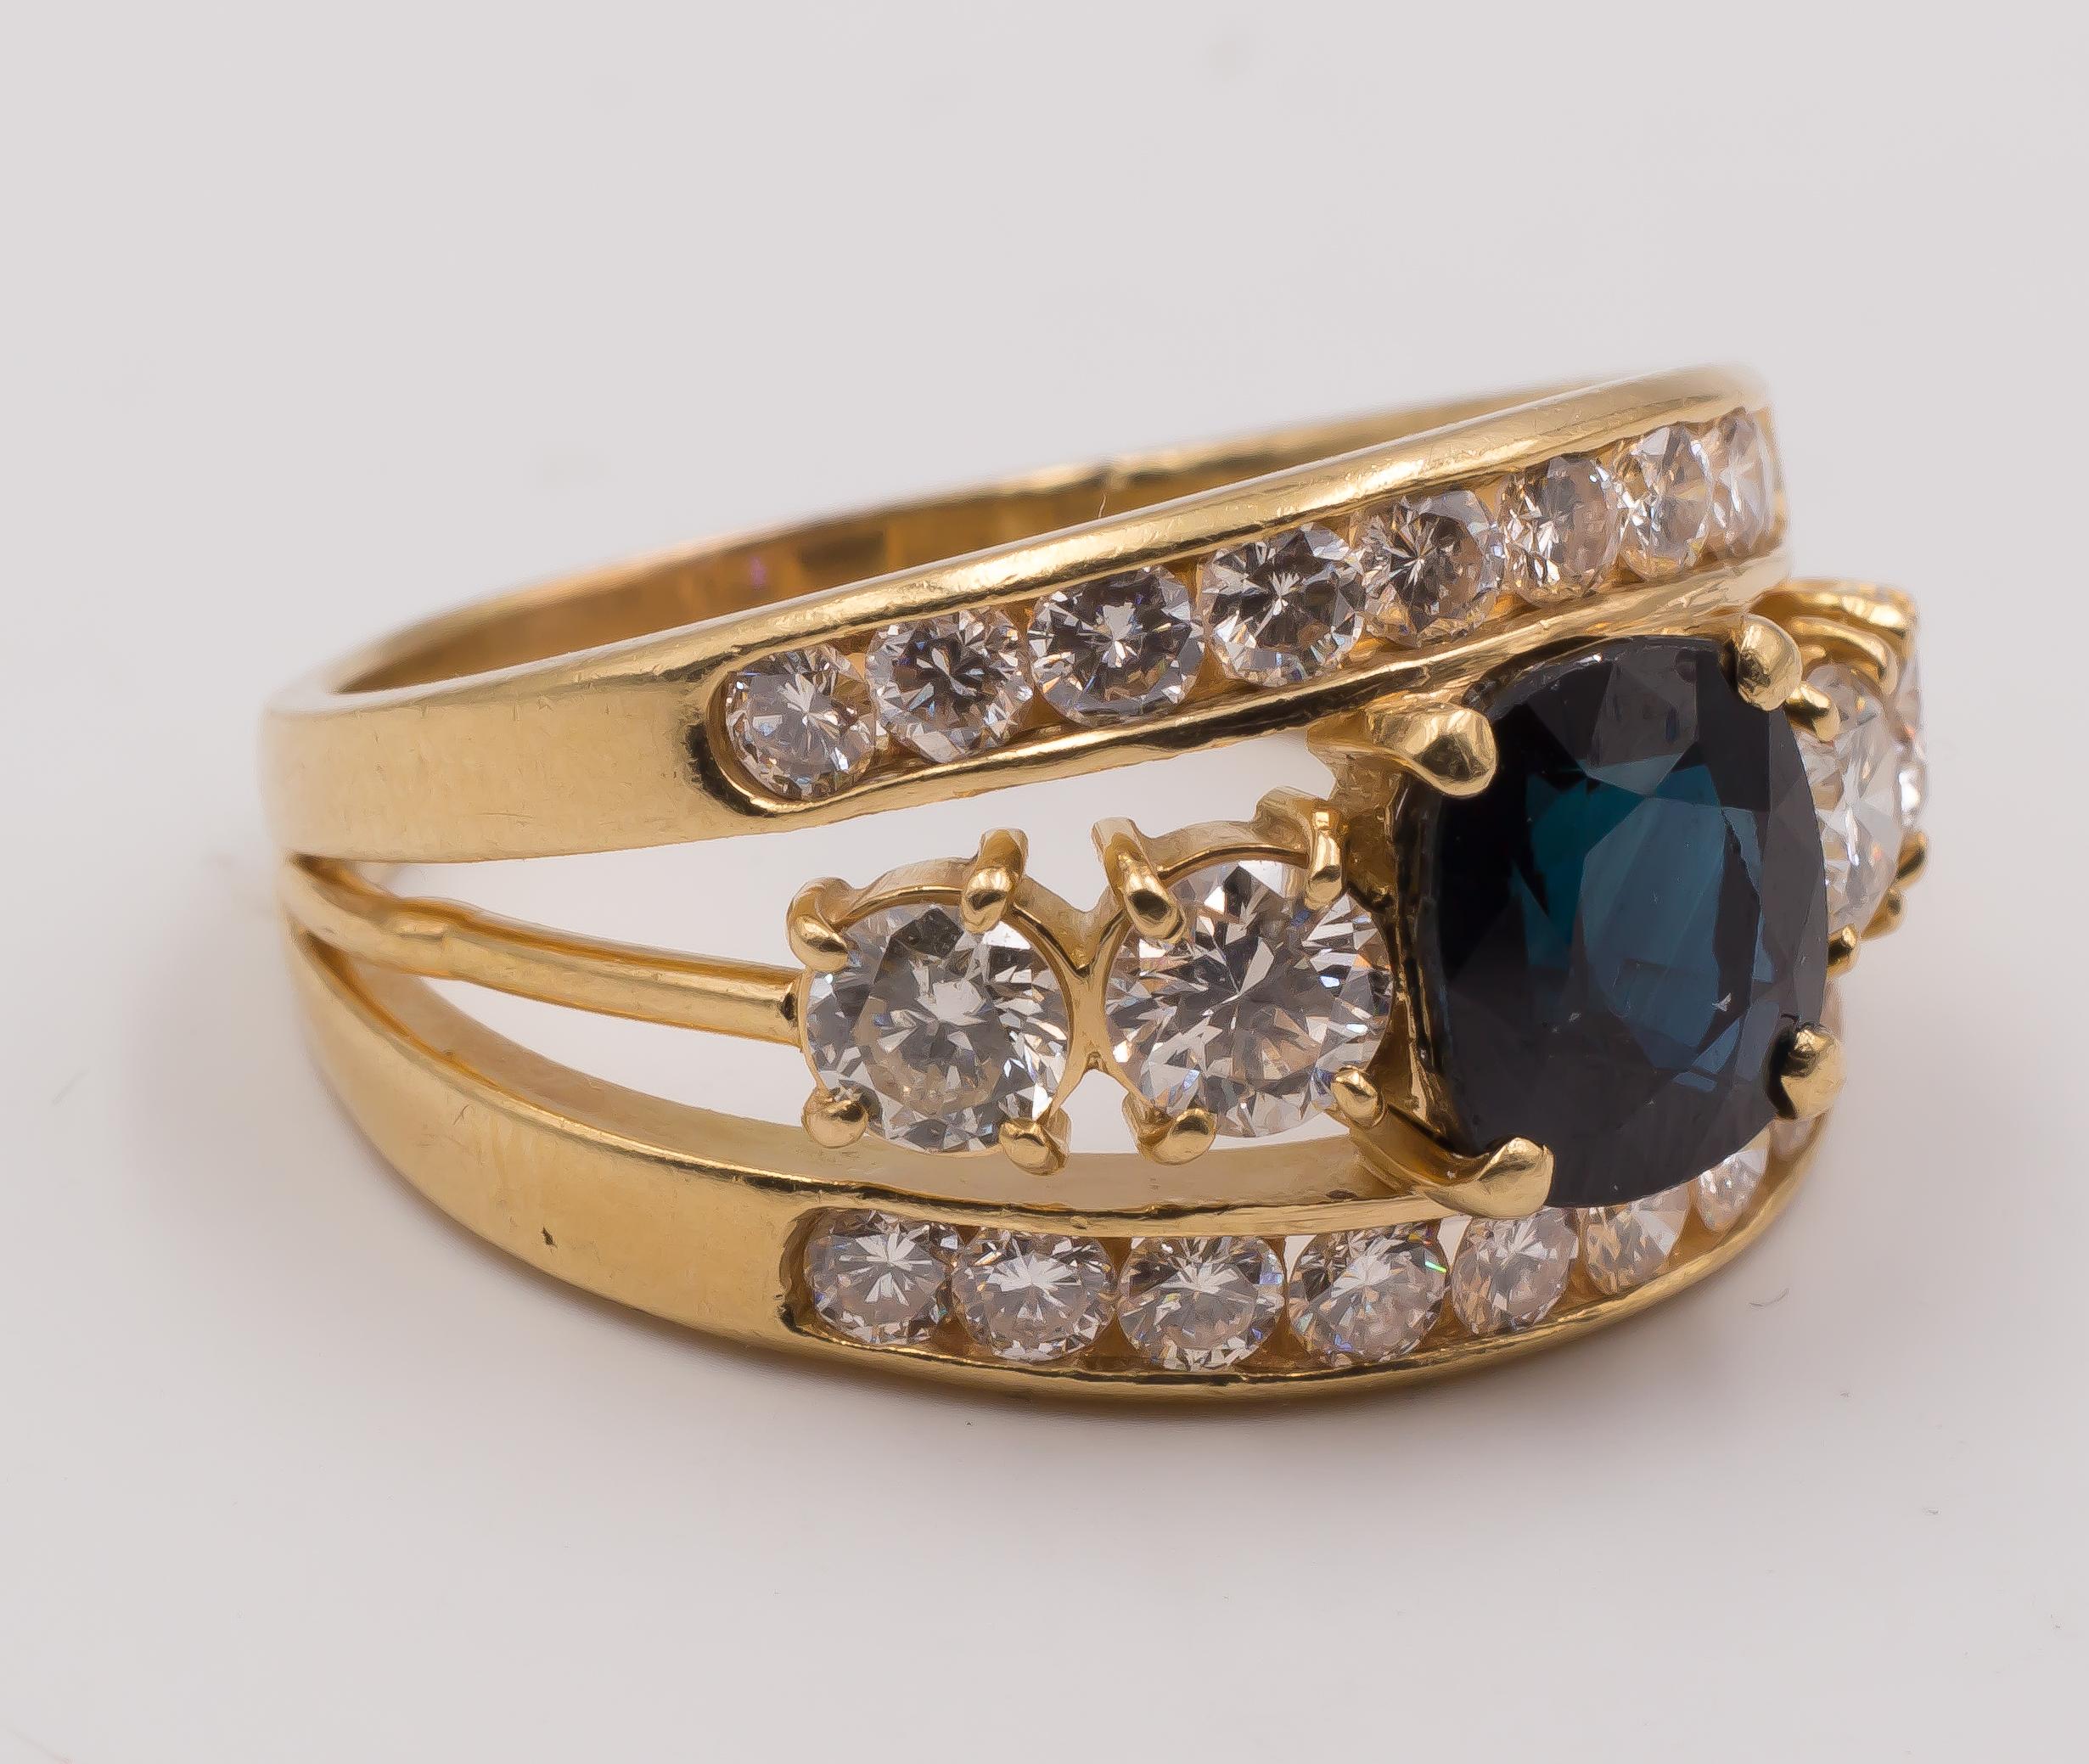 This stunning vintage ring has a beautiful shape, where the shank splits in three bands: the outer ones are each one set with ten round cut diamonds; in the middle of them the central band is decorated with a sapphire, flanked on either side by two